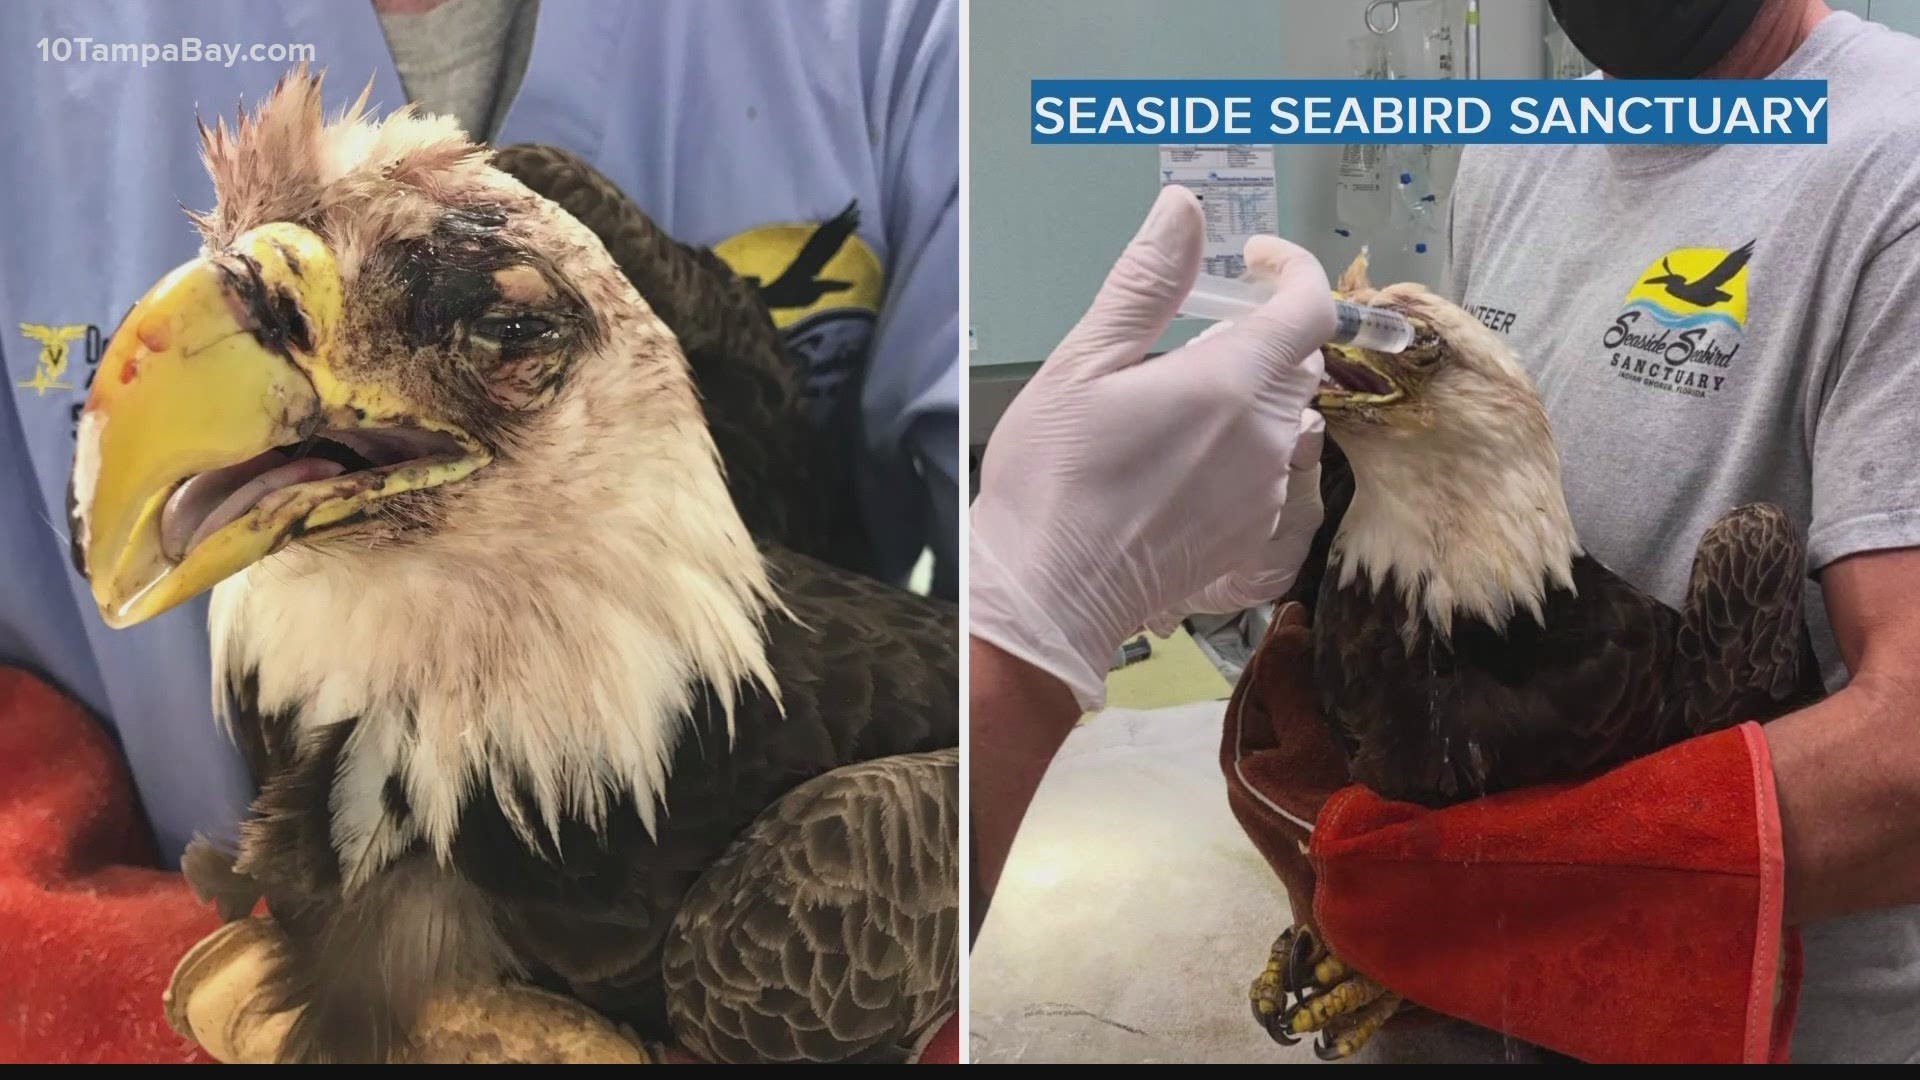 Richard and Alisa Rushing called the Seaside Seabird Sanctuary after finding an injured eagle in their yard. They have been keeping close tabs on the bird since.